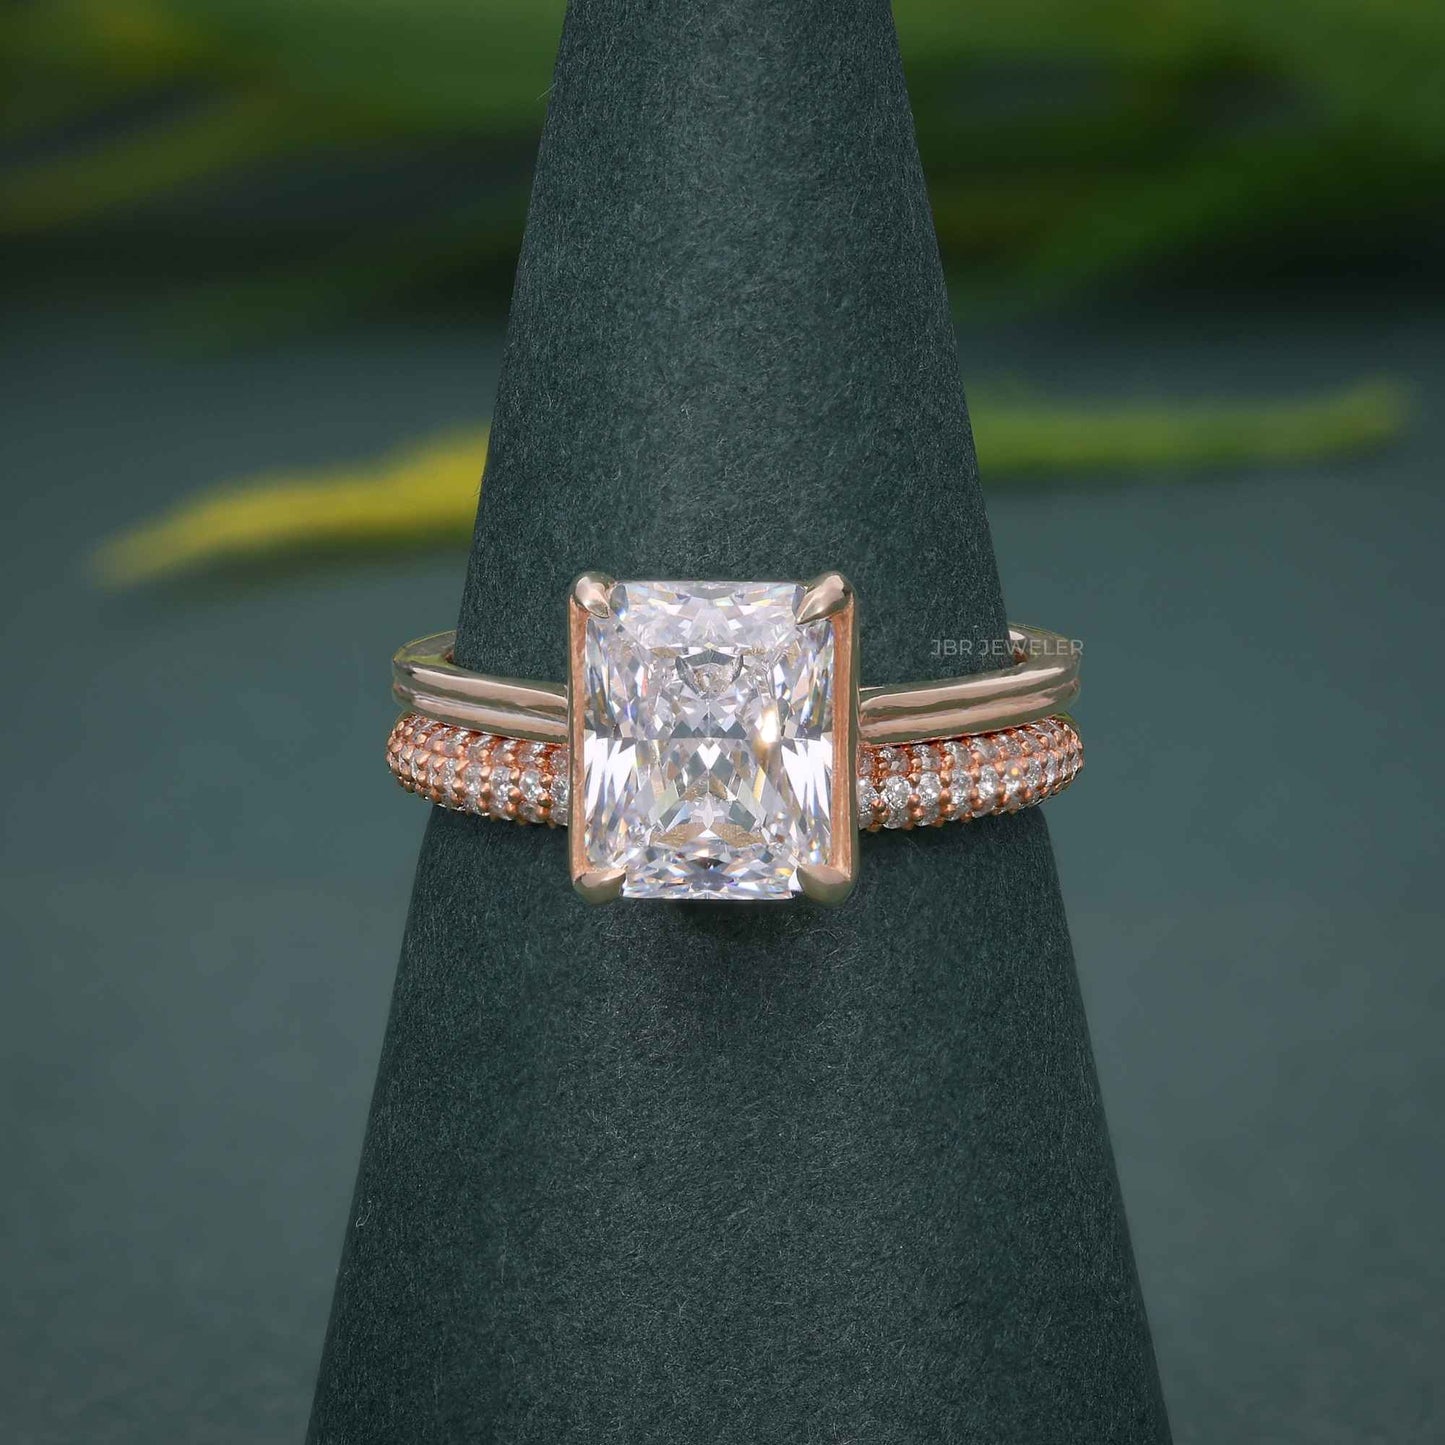 Radiant Cut Moissanite Diamond Solitaire Ring Set With Matching Band